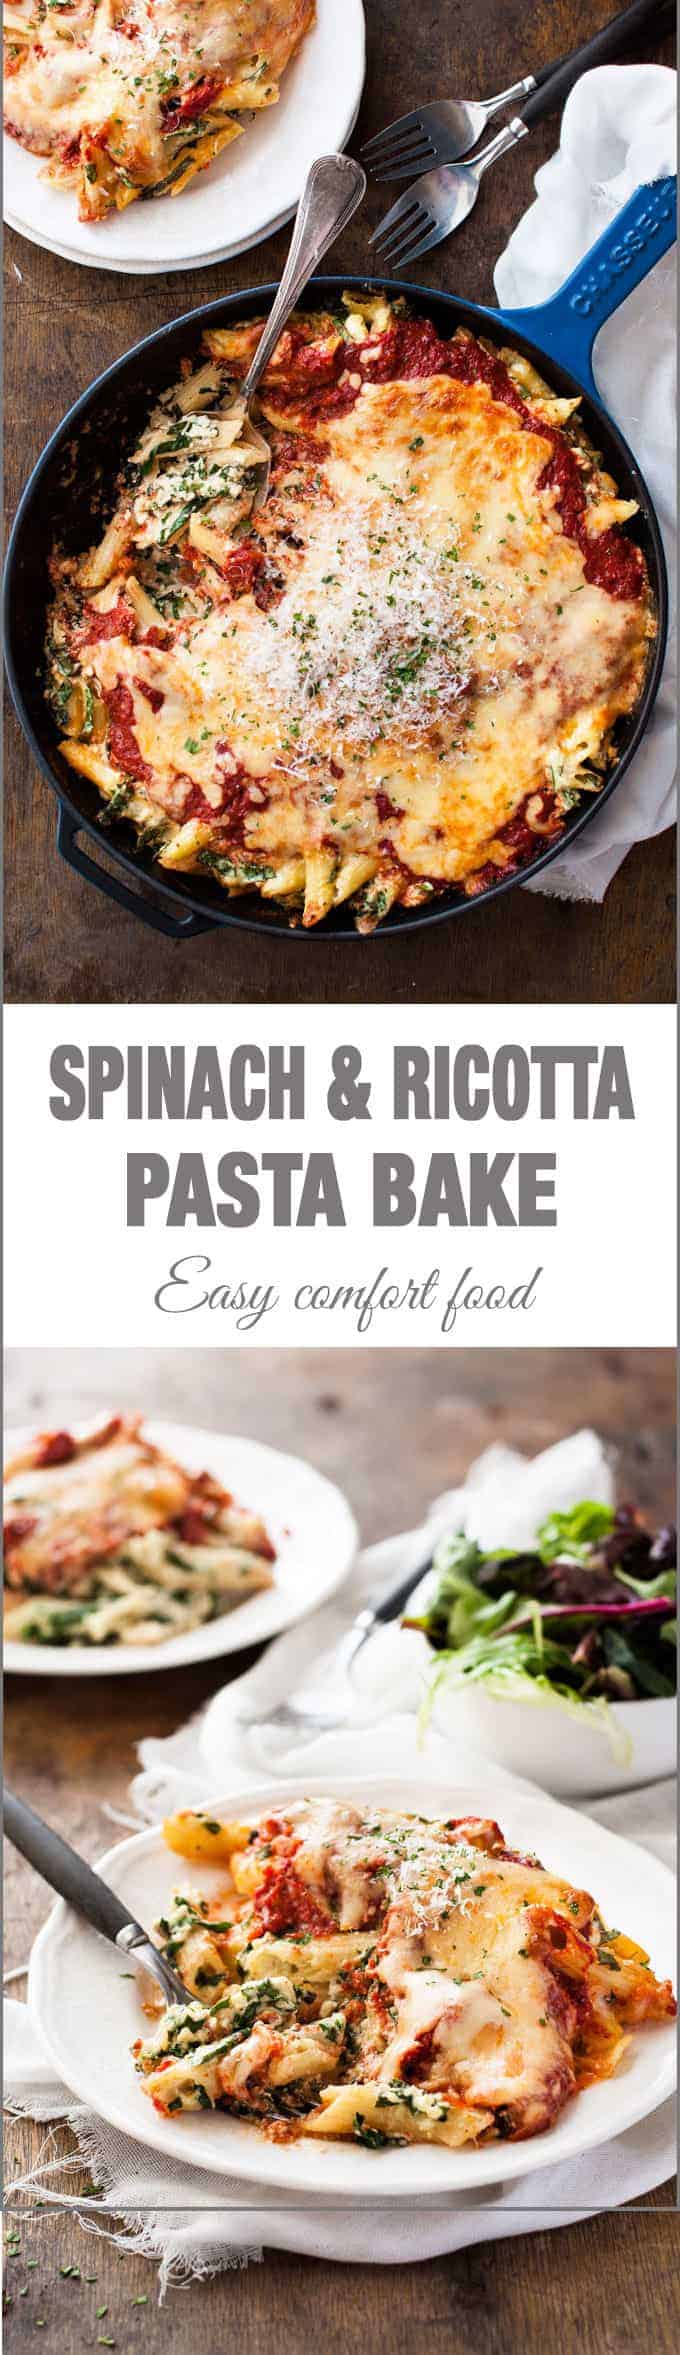 Spinach & Ricotta Pasta Bake - Quick to put together, and made from scratch! Made extra creamy by adding milk into the ricotta. Extra flavour addition possibilities are endless!